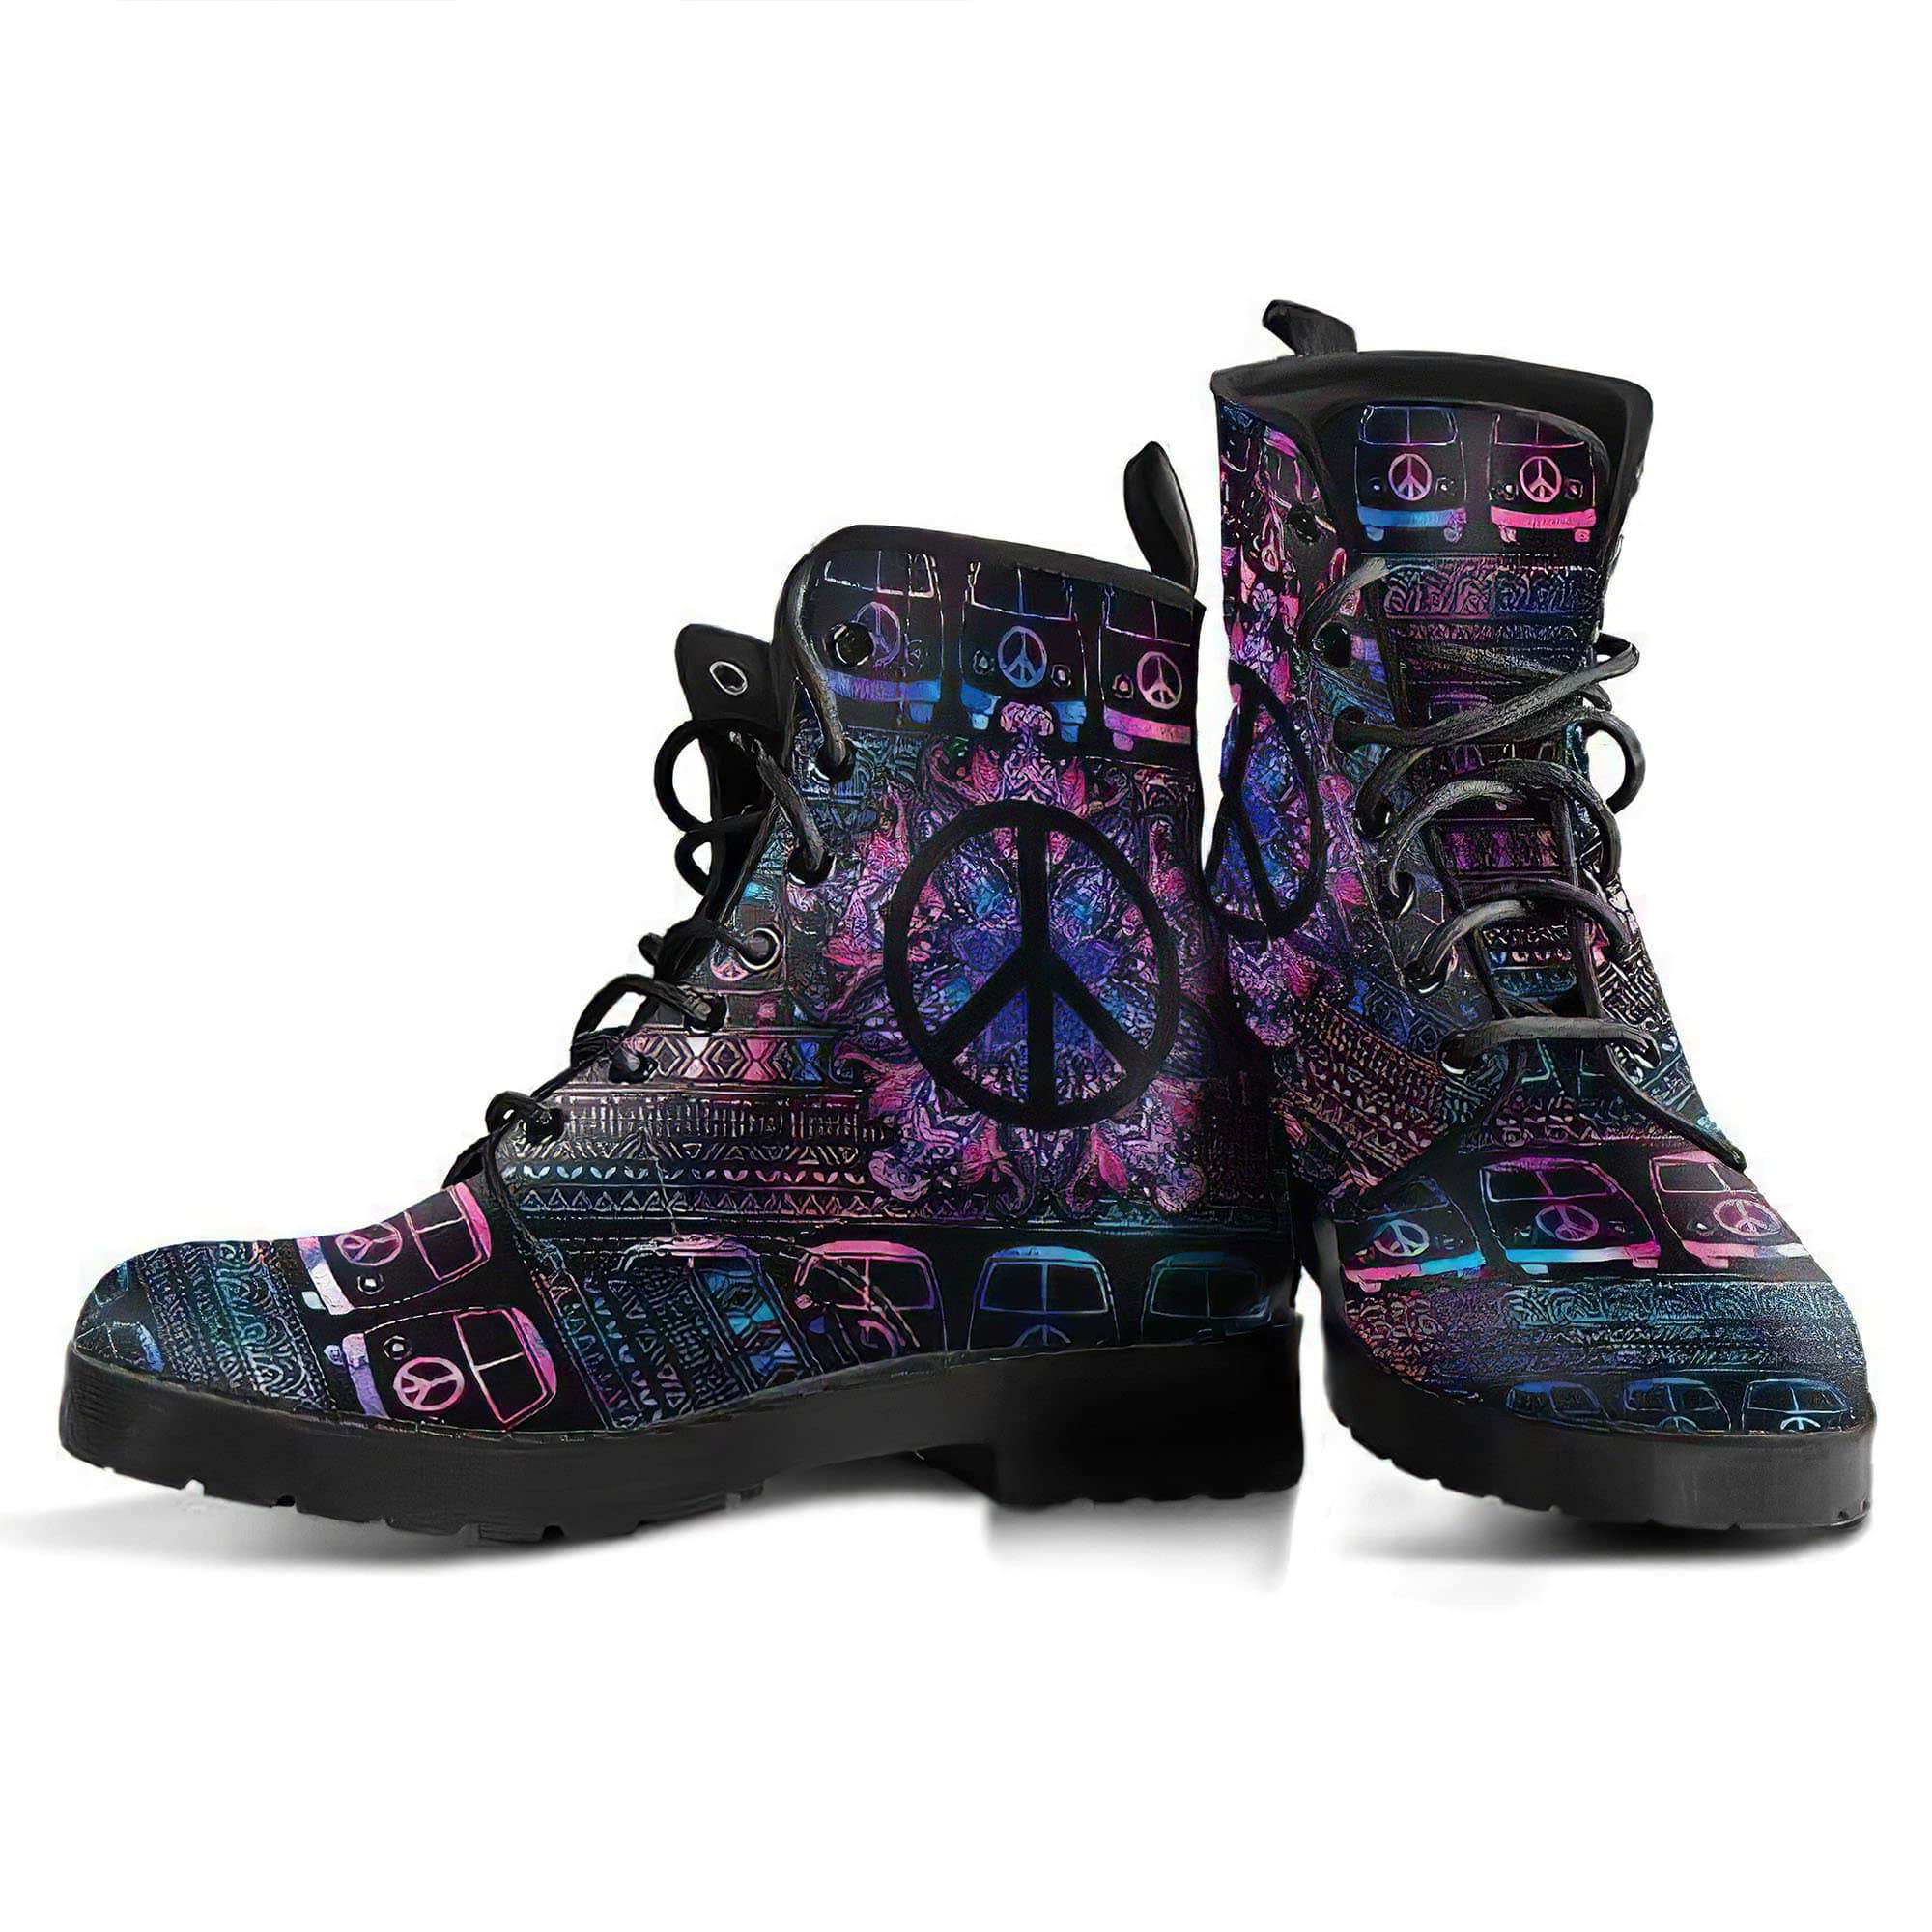 peace-hippie-van-handcrafted-boots-women-s-leather-boots-12051926548541.jpg